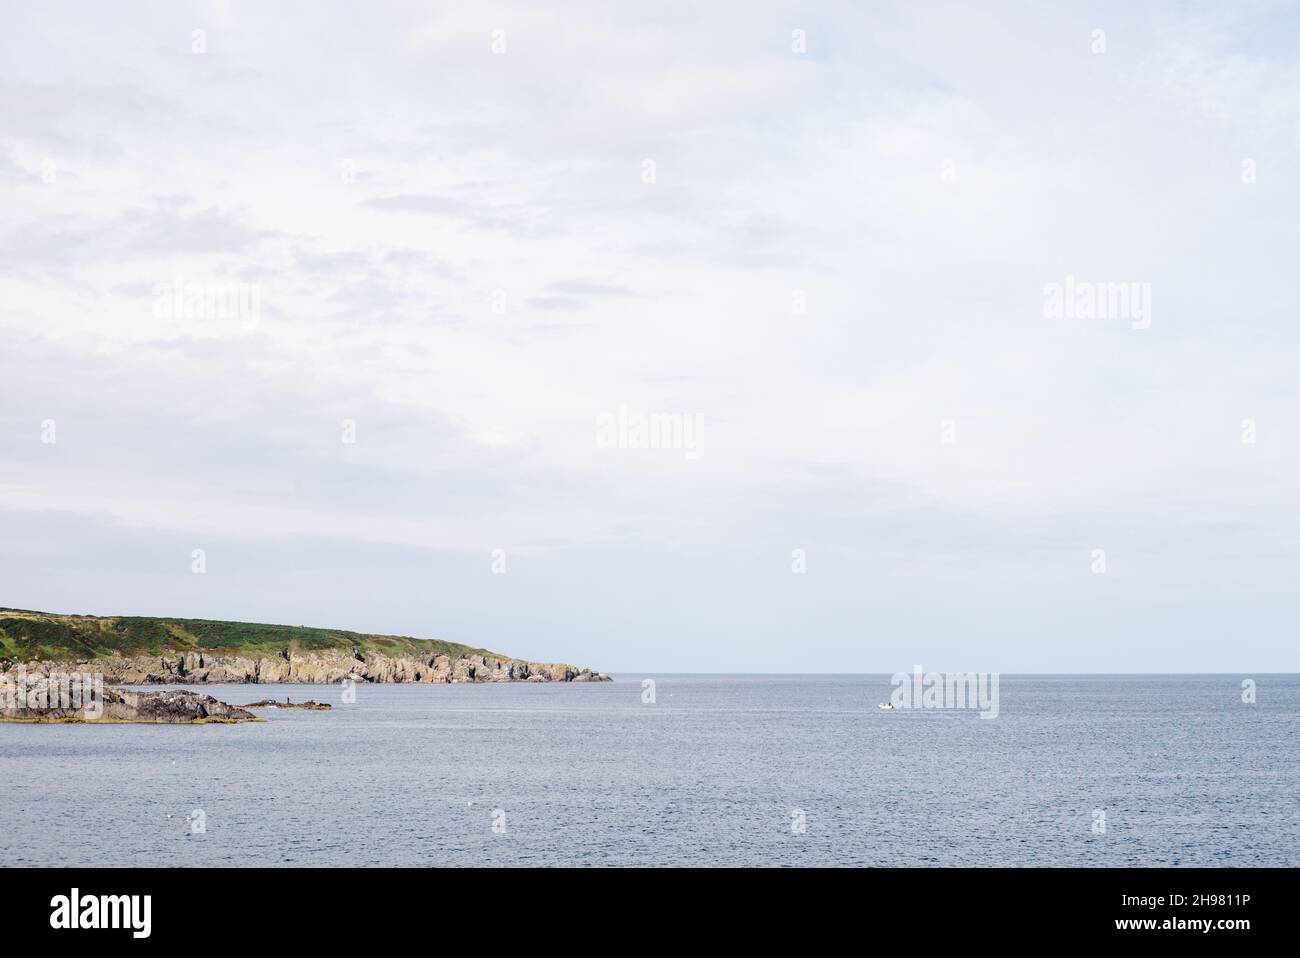 View along the rugged coast looking west from the harbour of Portsoy with a small lobster boat out collecting creels. Stock Photo